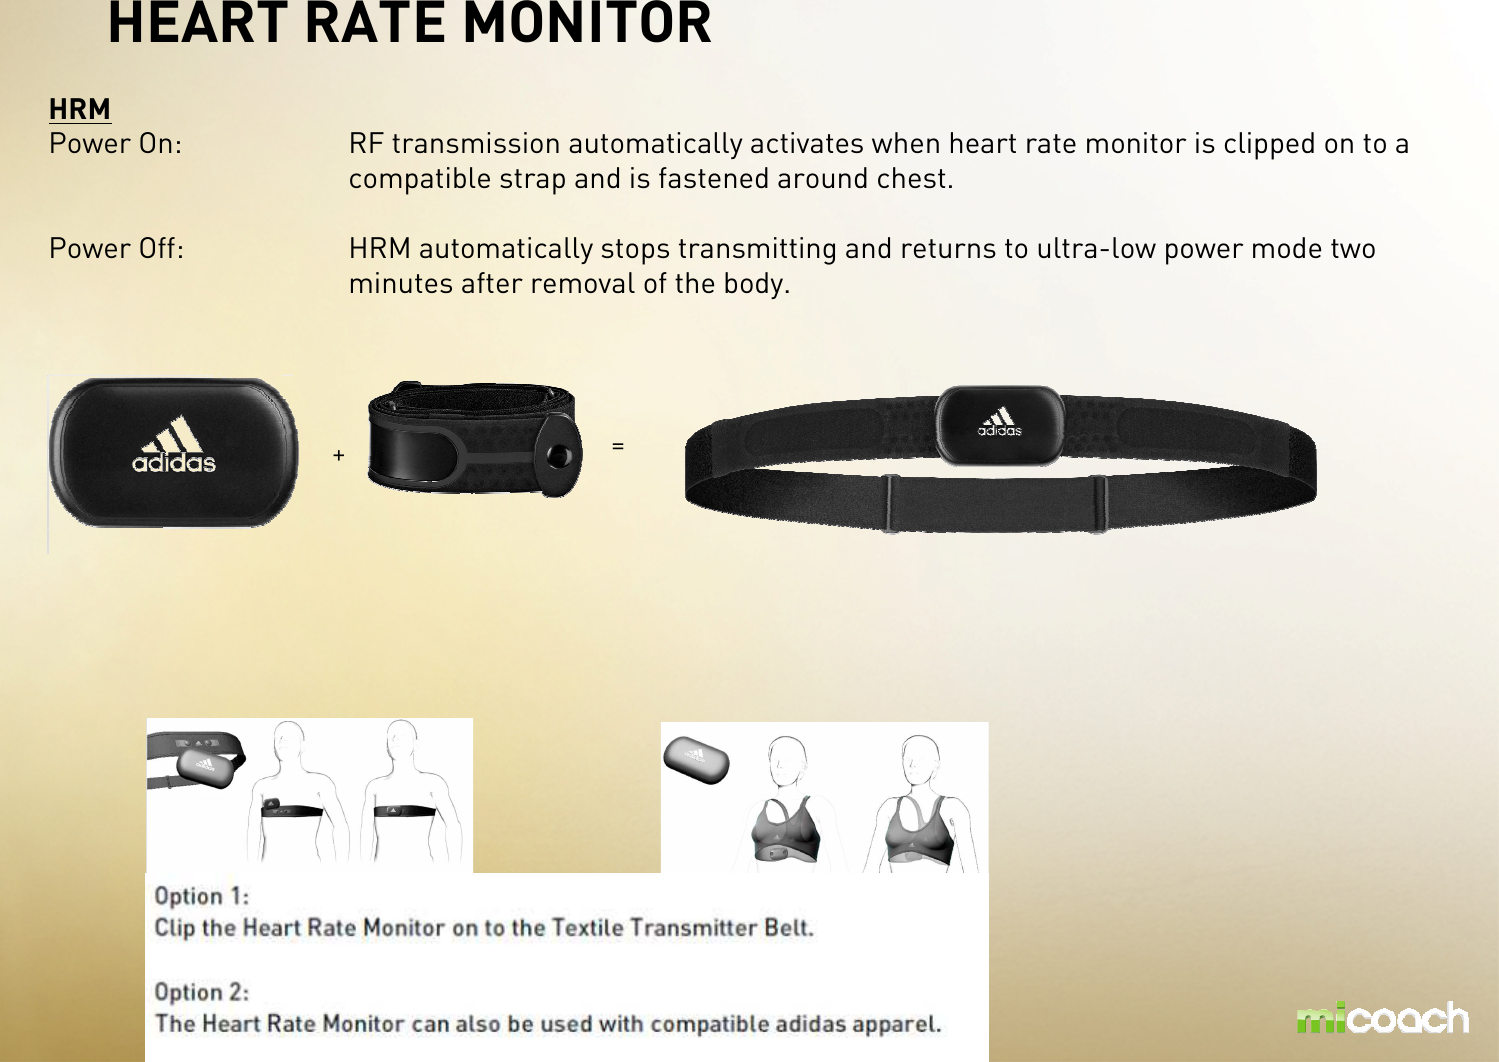 HRMPower On: RF transmission automatically activates when heart rate monitor is clipped on to a compatible strap and is fastened around chest.Power Off: HRM automatically stops transmitting and returns to ultra-low power mode two minutes after removal of the body.HEART RATE MONITOR+=